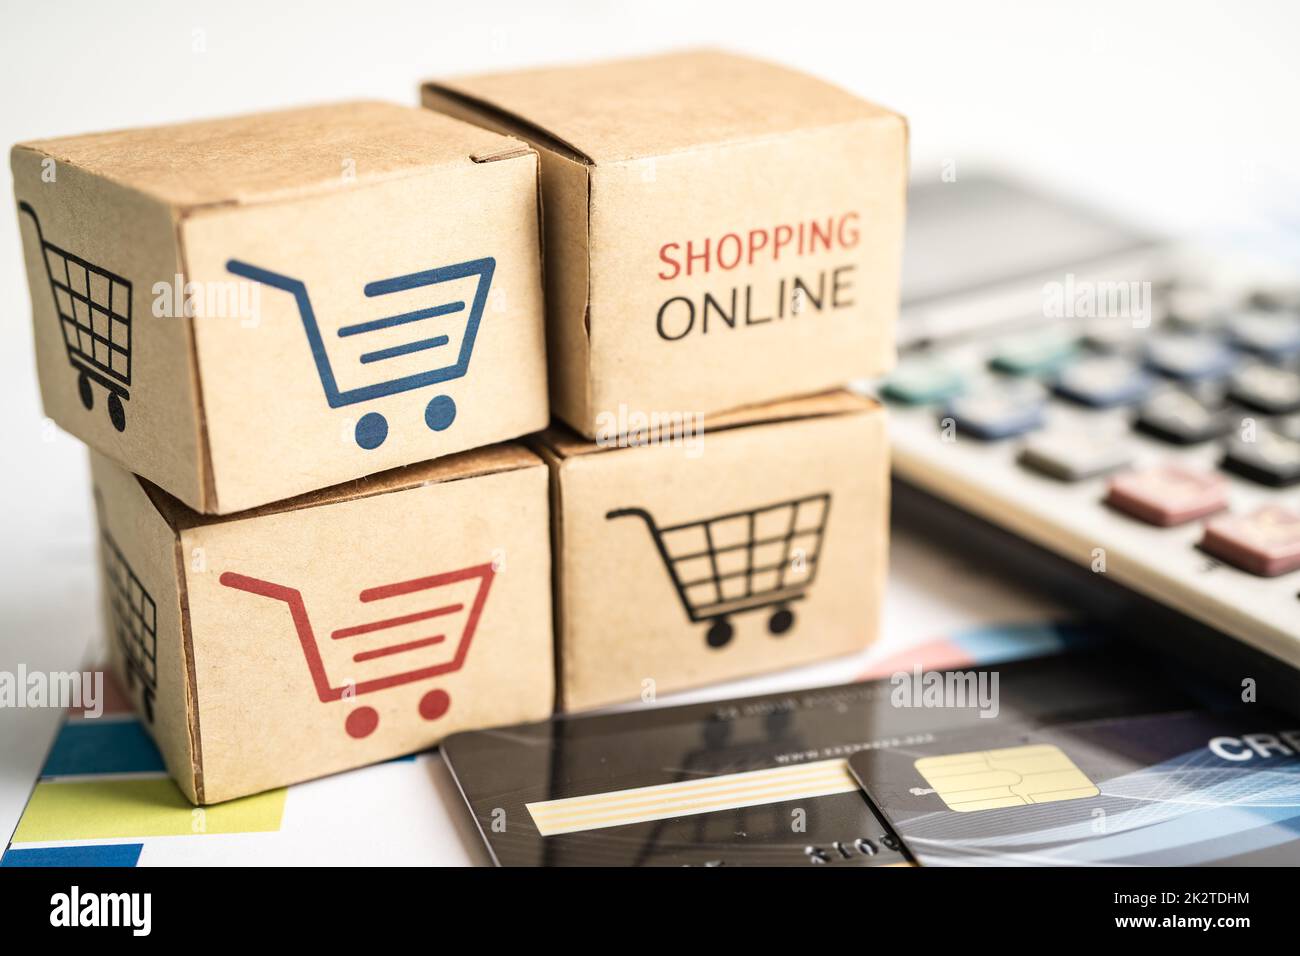 Shopping online box with credit card and calculator on graph. Finance commerce import export business concept. Stock Photo